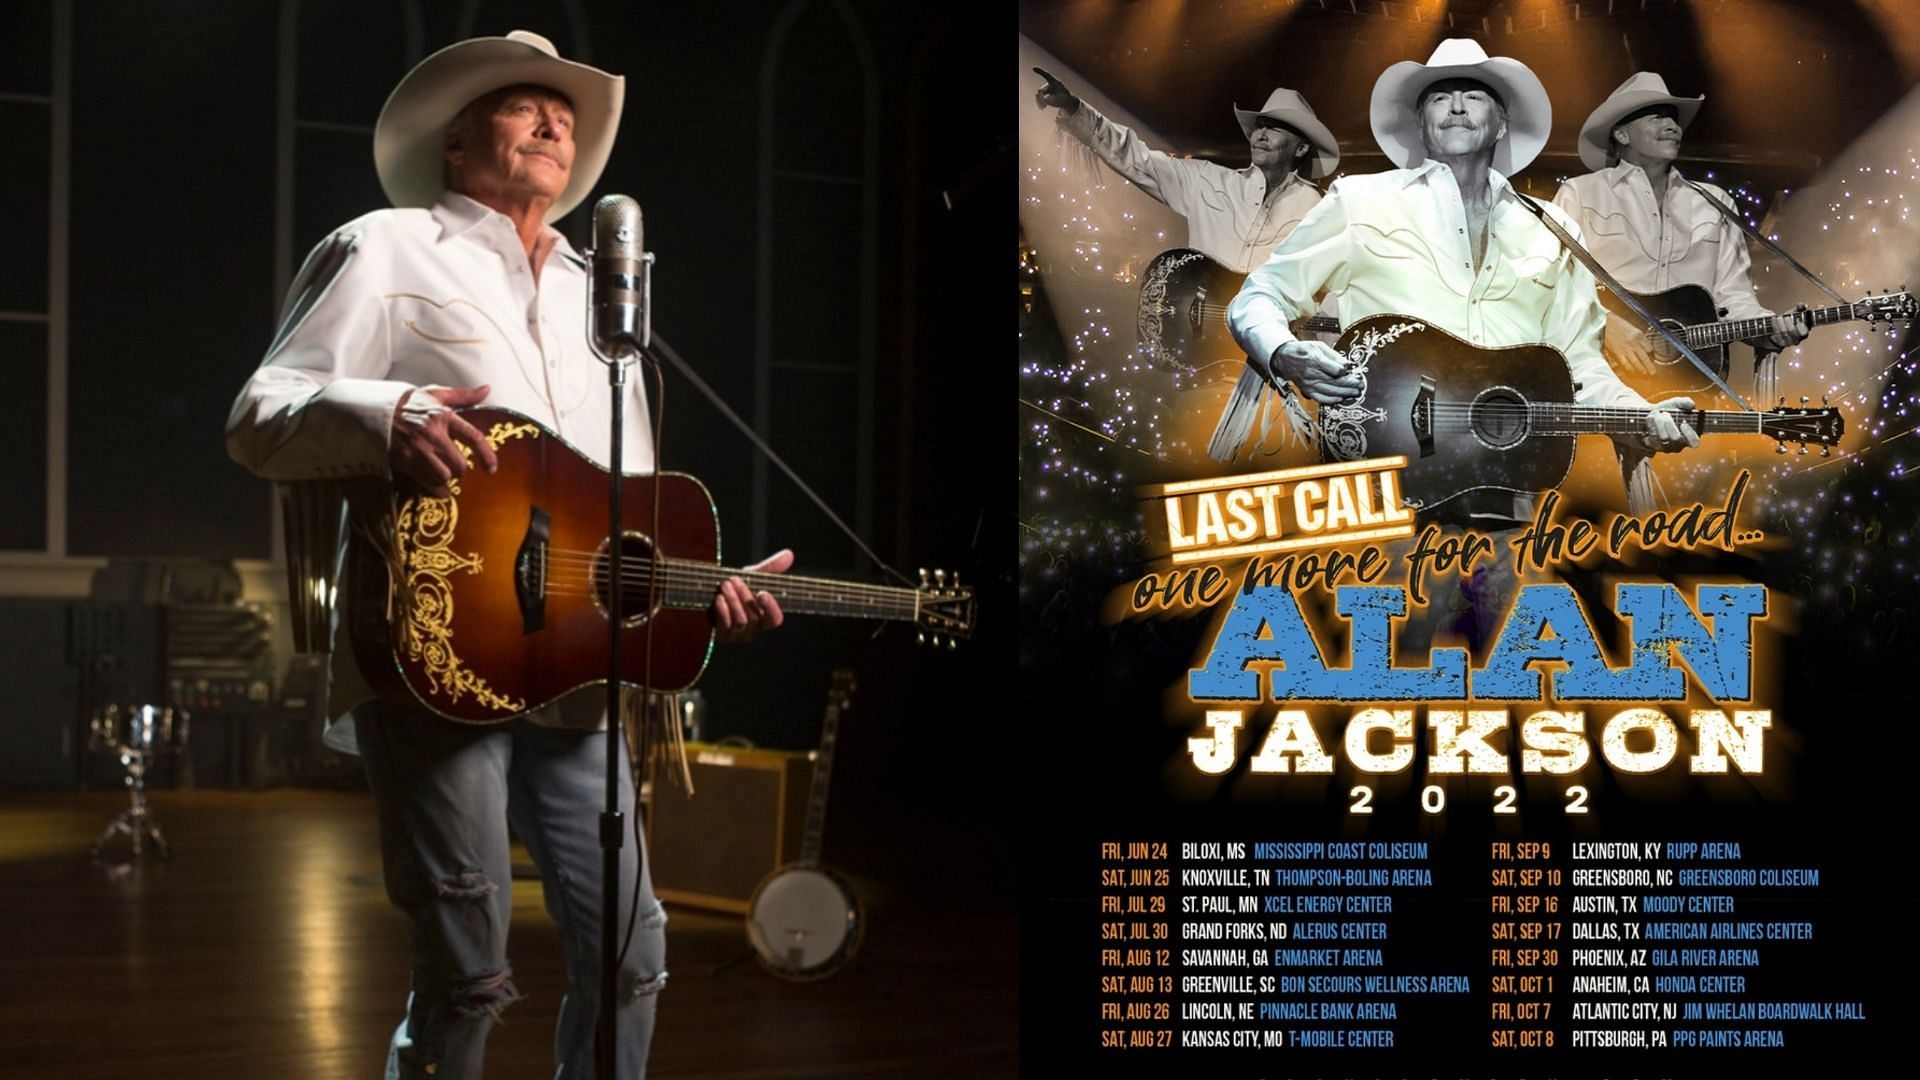 Alan Jackson Tour 2022 tickets Where to buy, presale, dates, and more